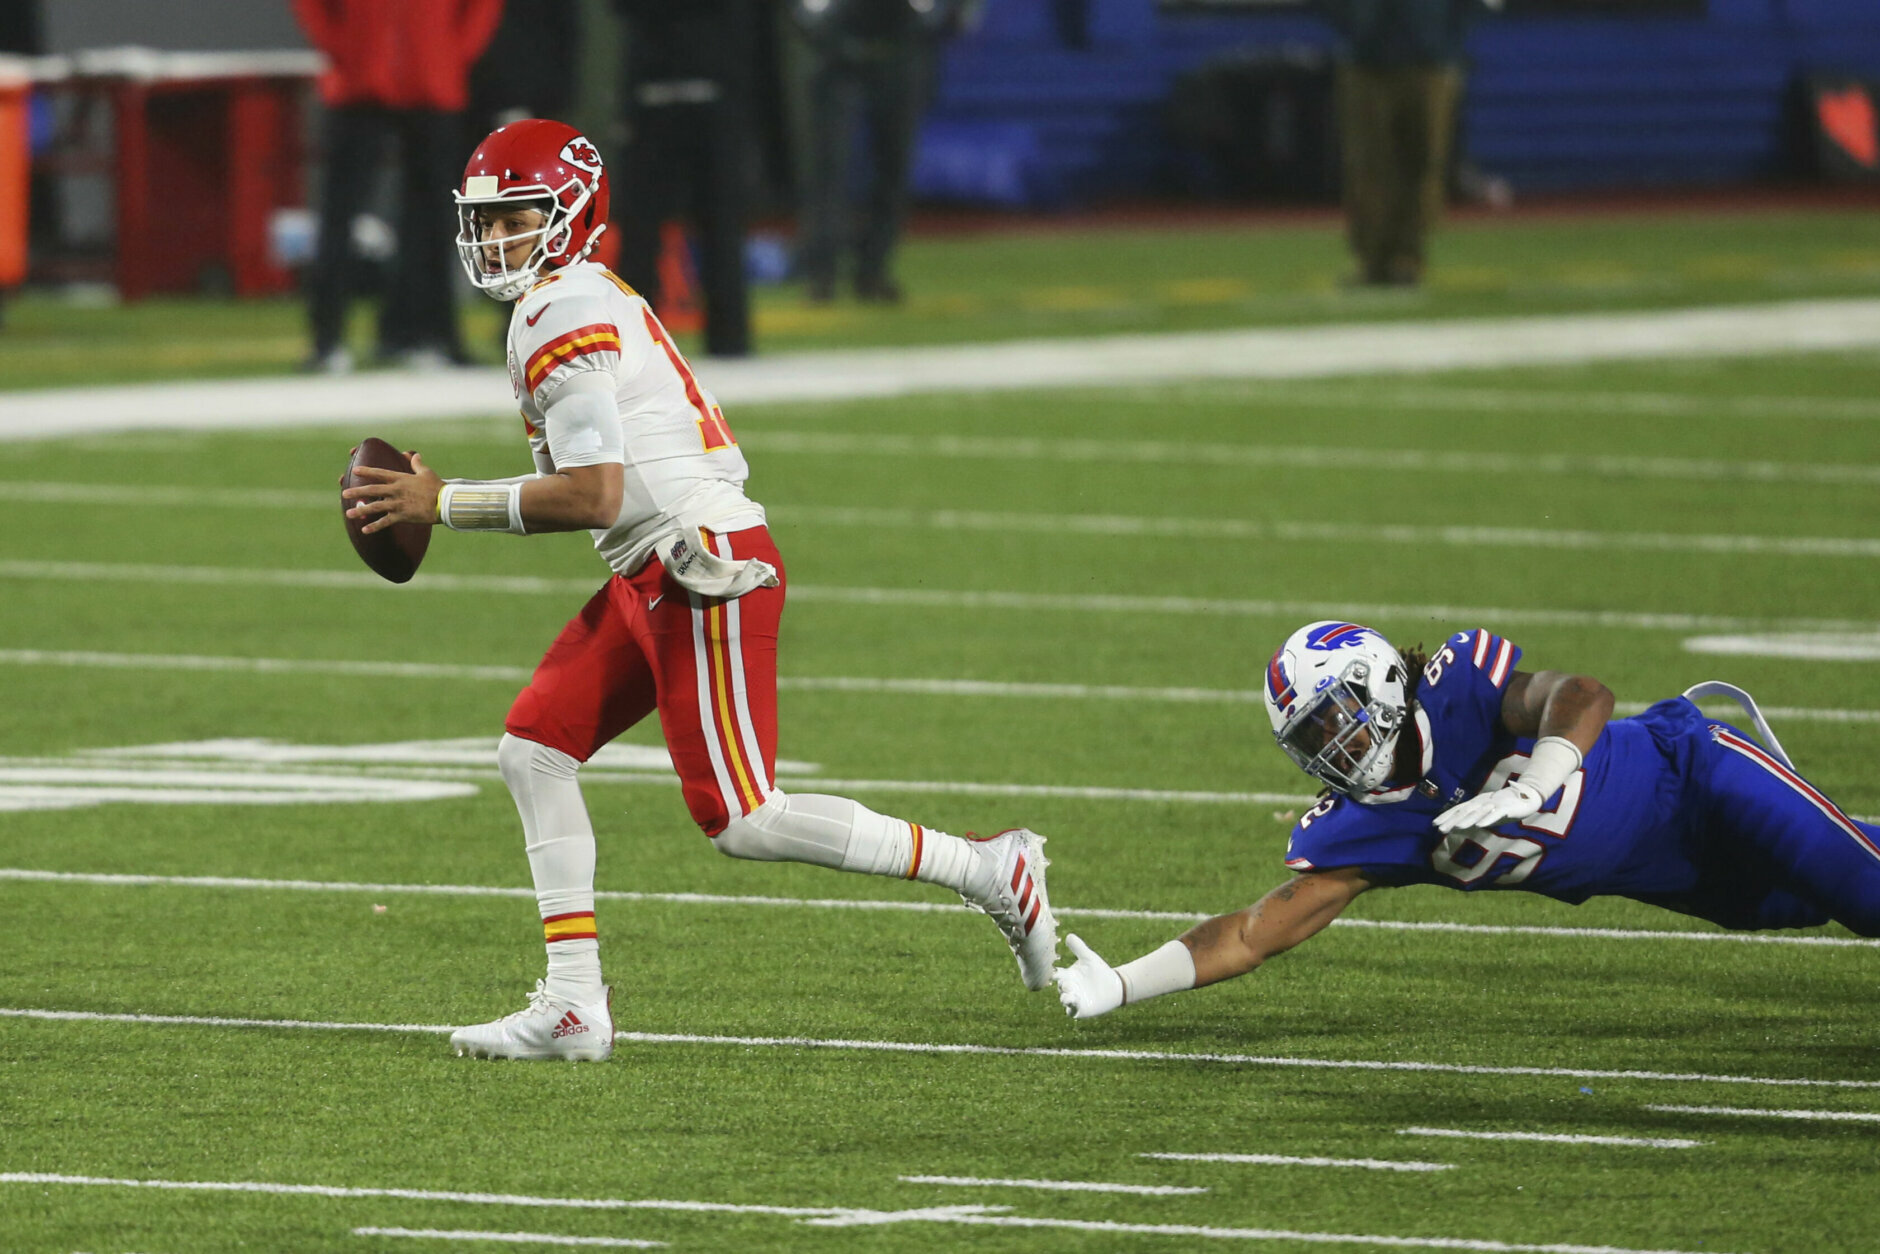 <p><em><strong>Chiefs 26</strong></em><br />
<em><strong>Bills 17</strong></em></p>
<p>This shouldn&#8217;t surprise anyone. Patrick Mahomes is <a href="https://twitter.com/ESPNStatsInfo/status/1318316250708234240?s=20" target="_blank" rel="noopener">a quarterbacking god</a>, the Kansas City defense is playing above expectations and Buffalo has <a href="https://twitter.com/ESPNStatsInfo/status/1318274117280419841?s=20" target="_blank" rel="noopener">historically been bad against defending champions</a>. But here&#8217;s what should make NFL defensive coordinators wake up in a cold sweat: The Chiefs haven&#8217;t even played Le&#8217;Veon Bell yet and still ran roughshod over a good Bills defense for 245 rushing yards on 46 attempts &#8212; the most ever for an Andy Reid offense in his 22-year head coaching career. If this is suddenly a two-dimensional juggernaut, nothing can stop KC from repeating as champs.</p>
